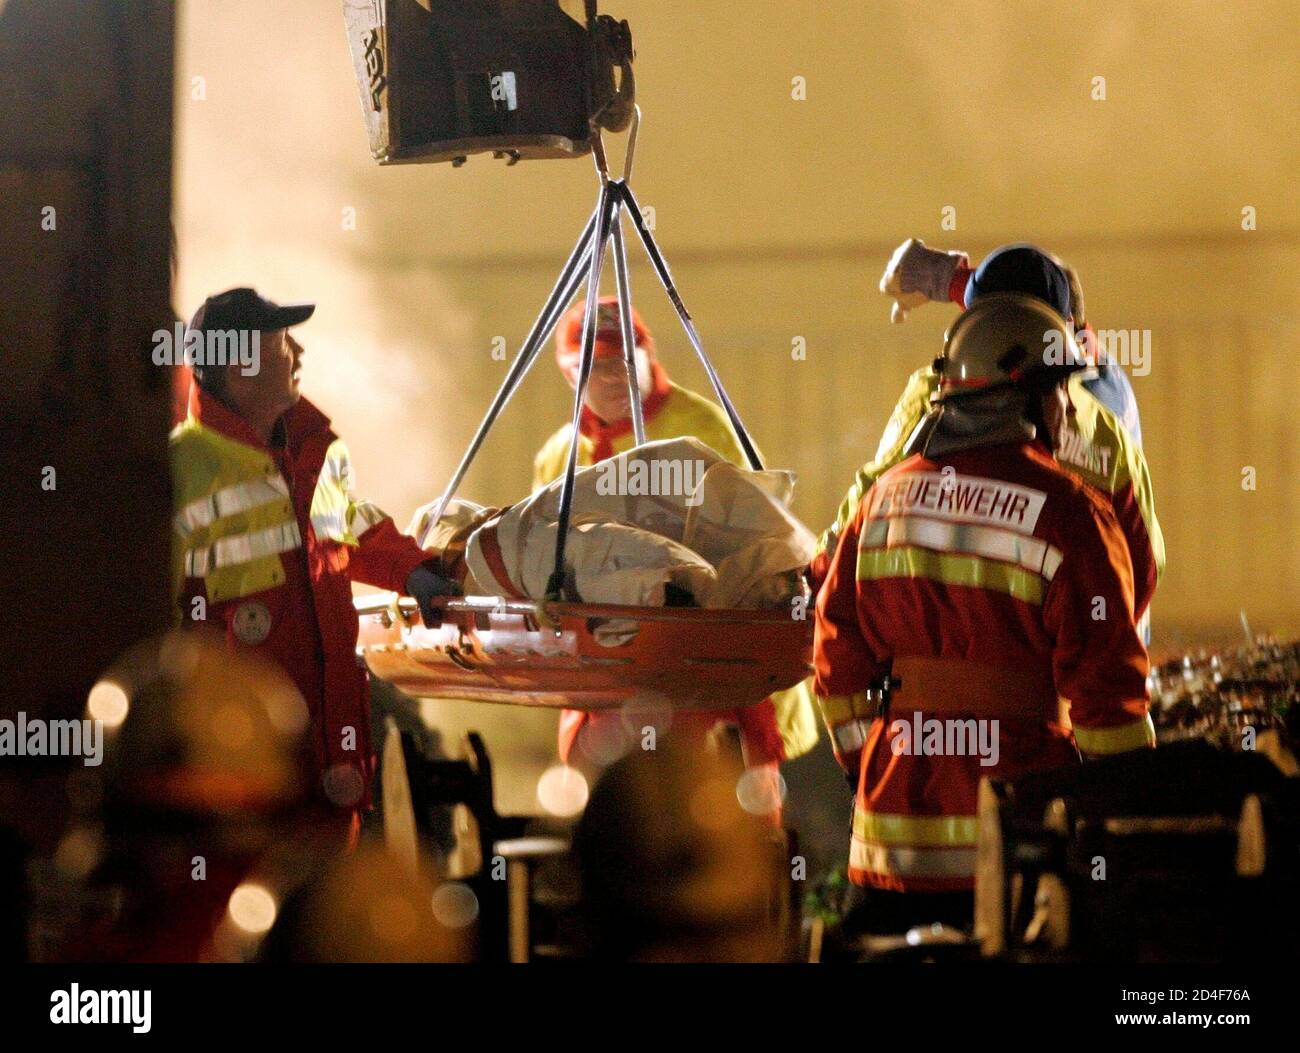 The body of one firefighter is lifted from an underground car park, the roof of which collapsed and buried up to seven firefighters underneath it in the town of Gretzenbach between the cities of Basel and Zurich November 27, 2004. Construction experts, earthquake rescue specialists and other fire and rescue personnel raced against time to find the men who had been battling a fire in the residential car park when the roof caved in and trapped them in its rubble. REUTERS/Ruben Sprich  RS/ABP Stock Photo